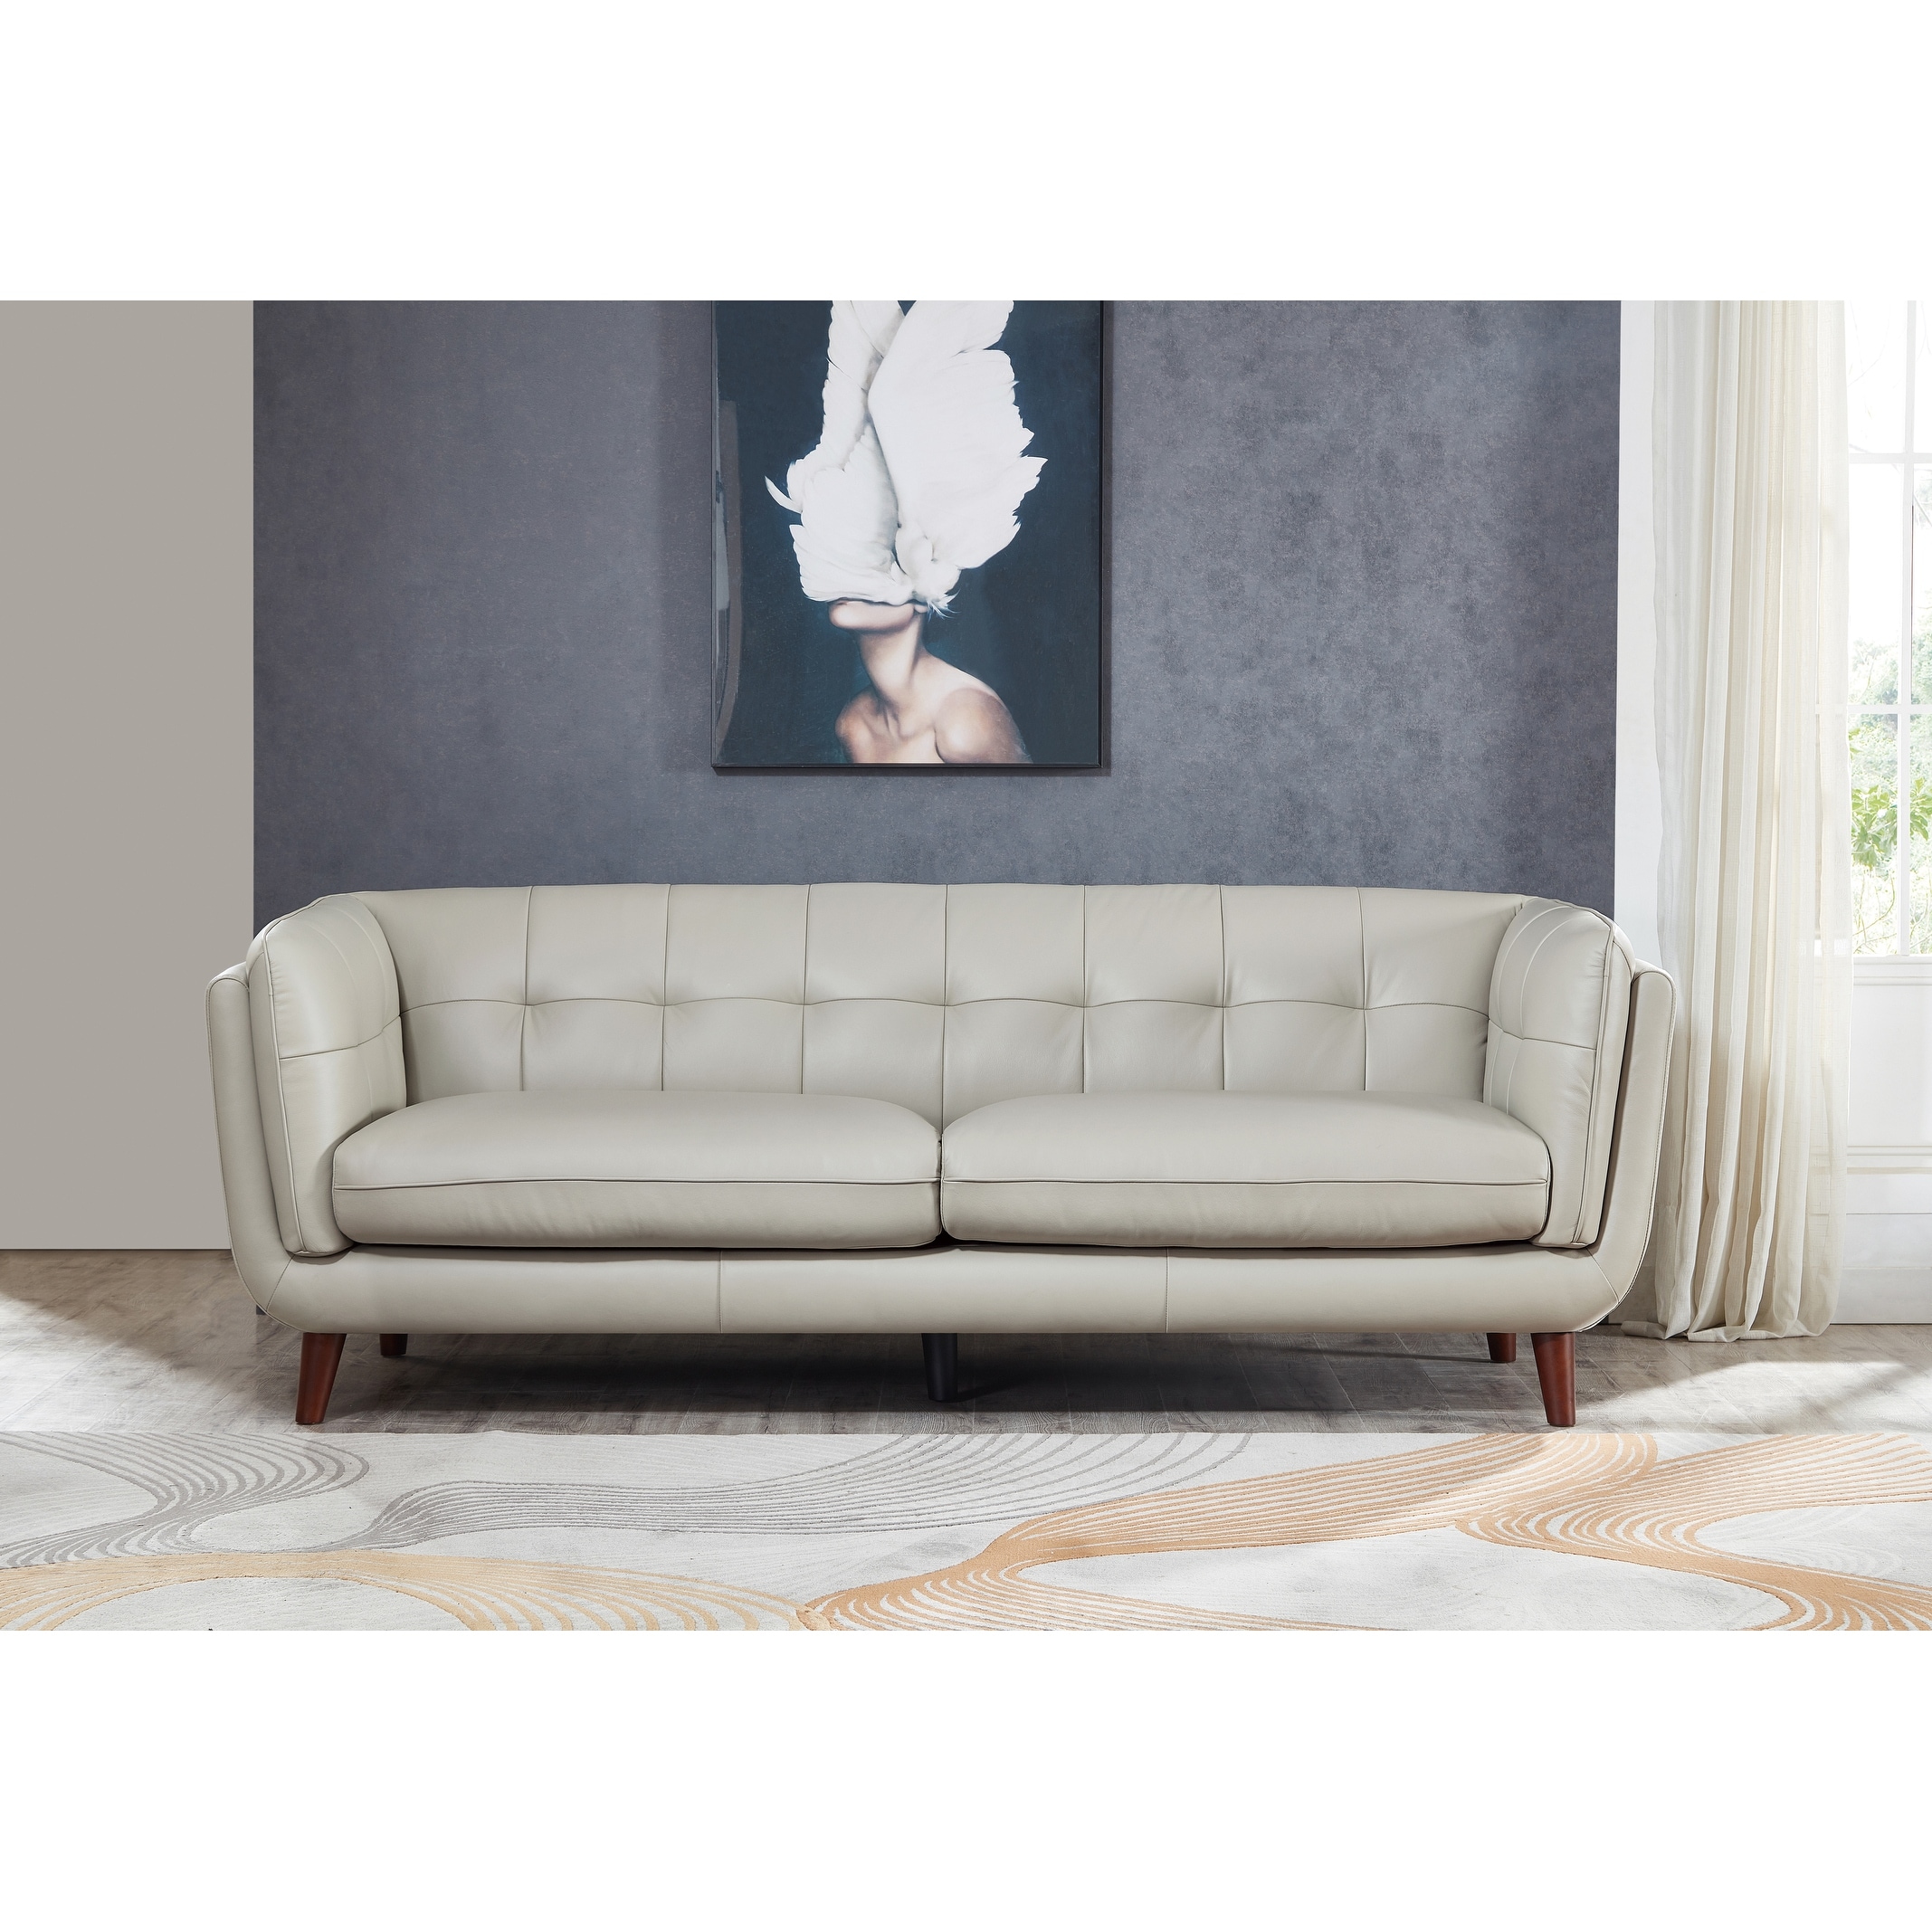 Hydeline USA Hydeline Solana Top Grain Leather Sofa With Feather, Memory Foam and Springs